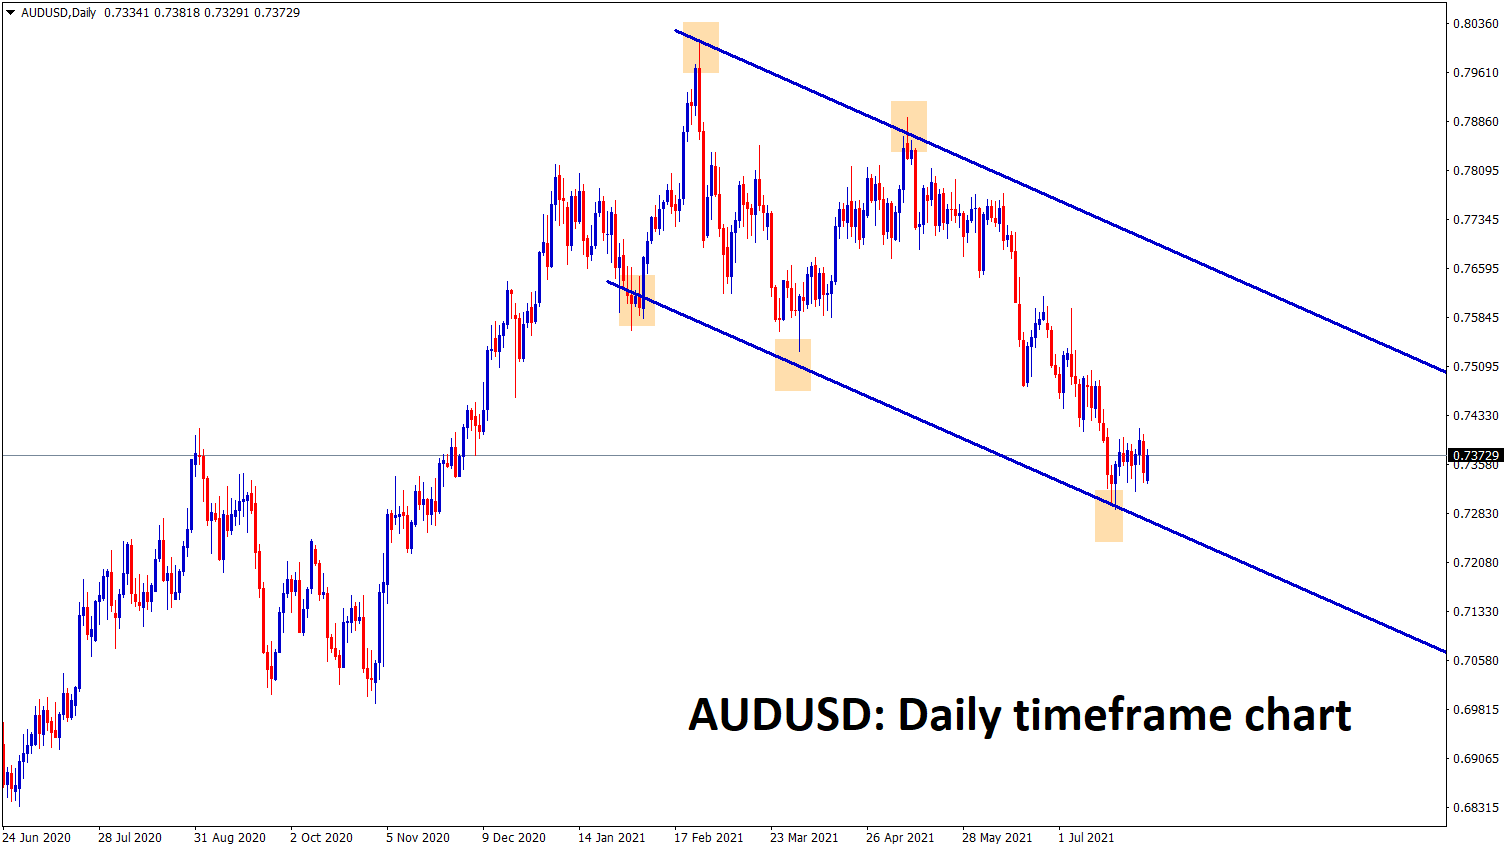 AUDUSD is consolidating at the lower low level of the descending channel